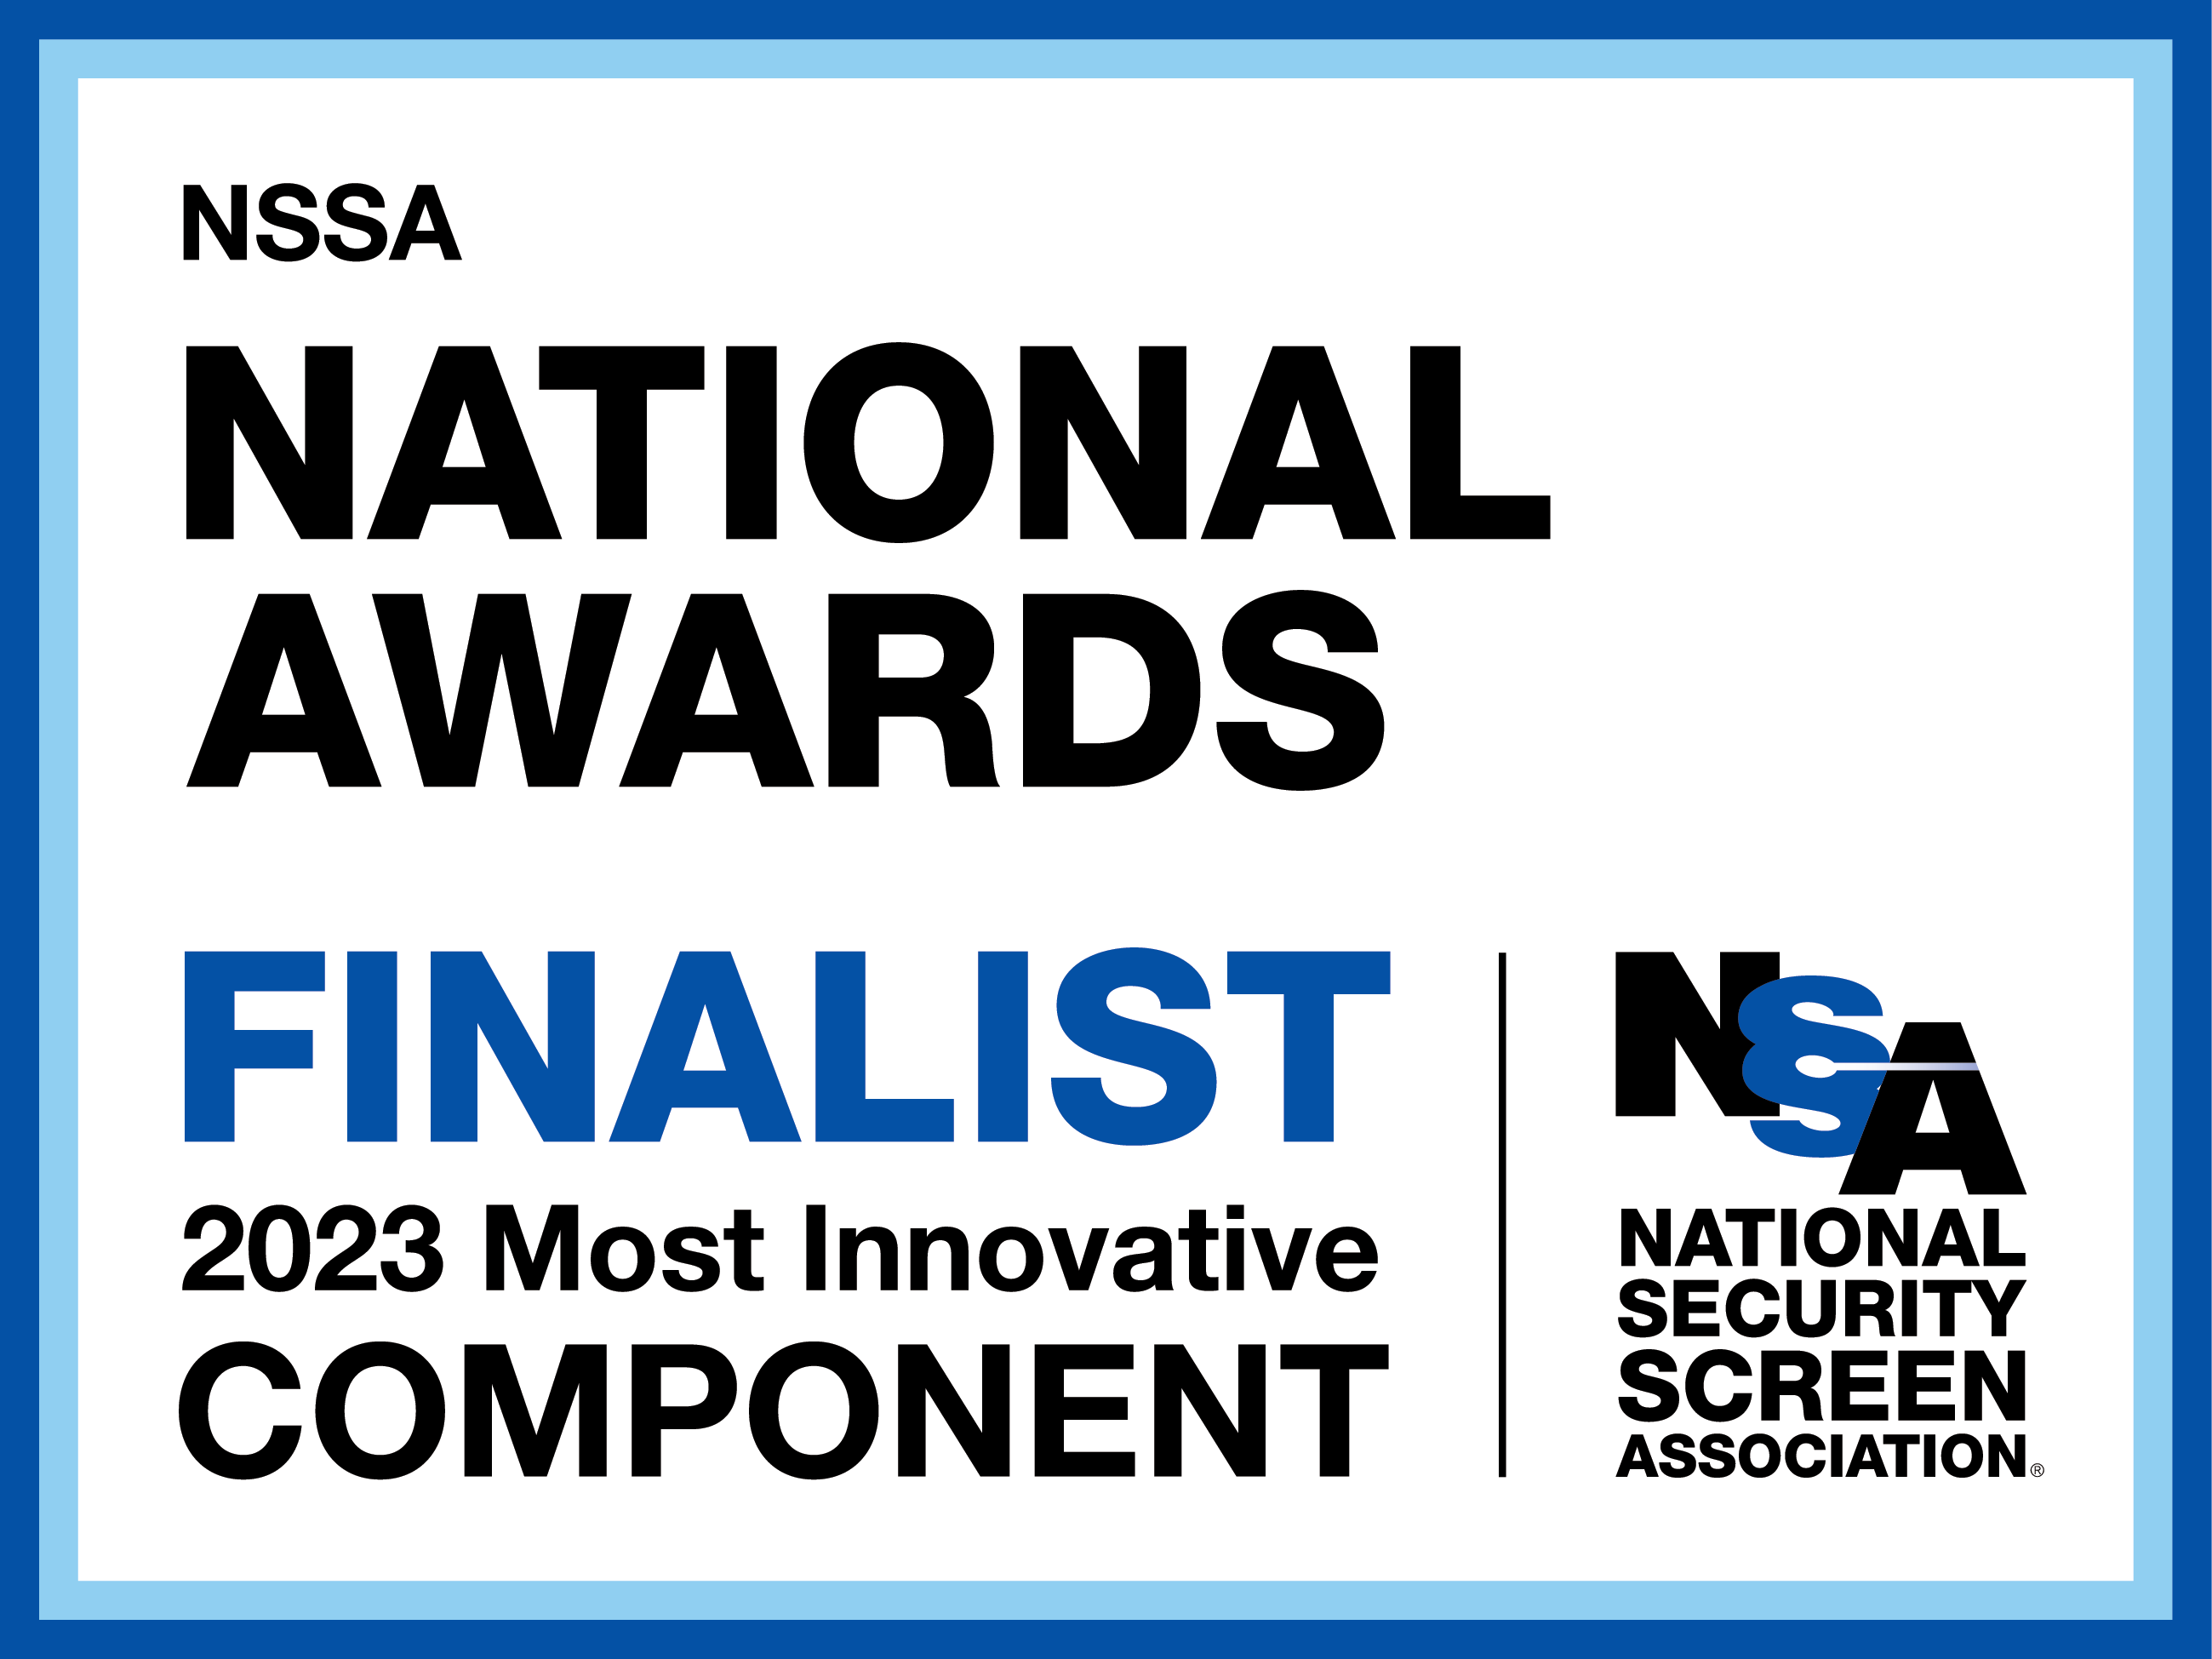 NSSA National Awards finalist 2023 - Most Innovative Component